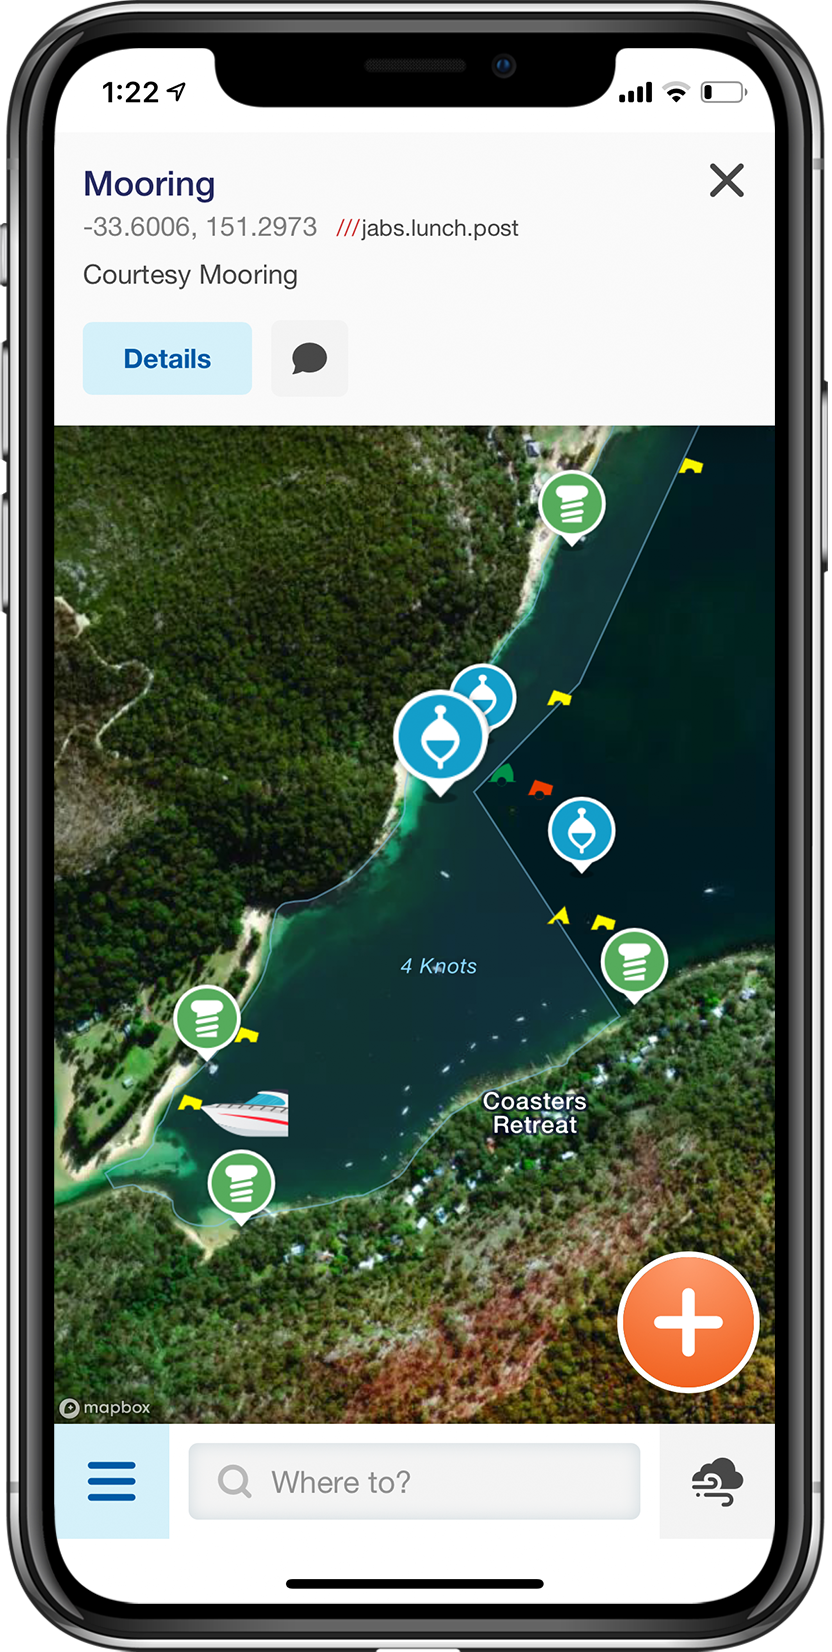 An image of an iPhone showing the Deckee app interface. The screen shows a photo of a coastal bay with map pins marking moorings.